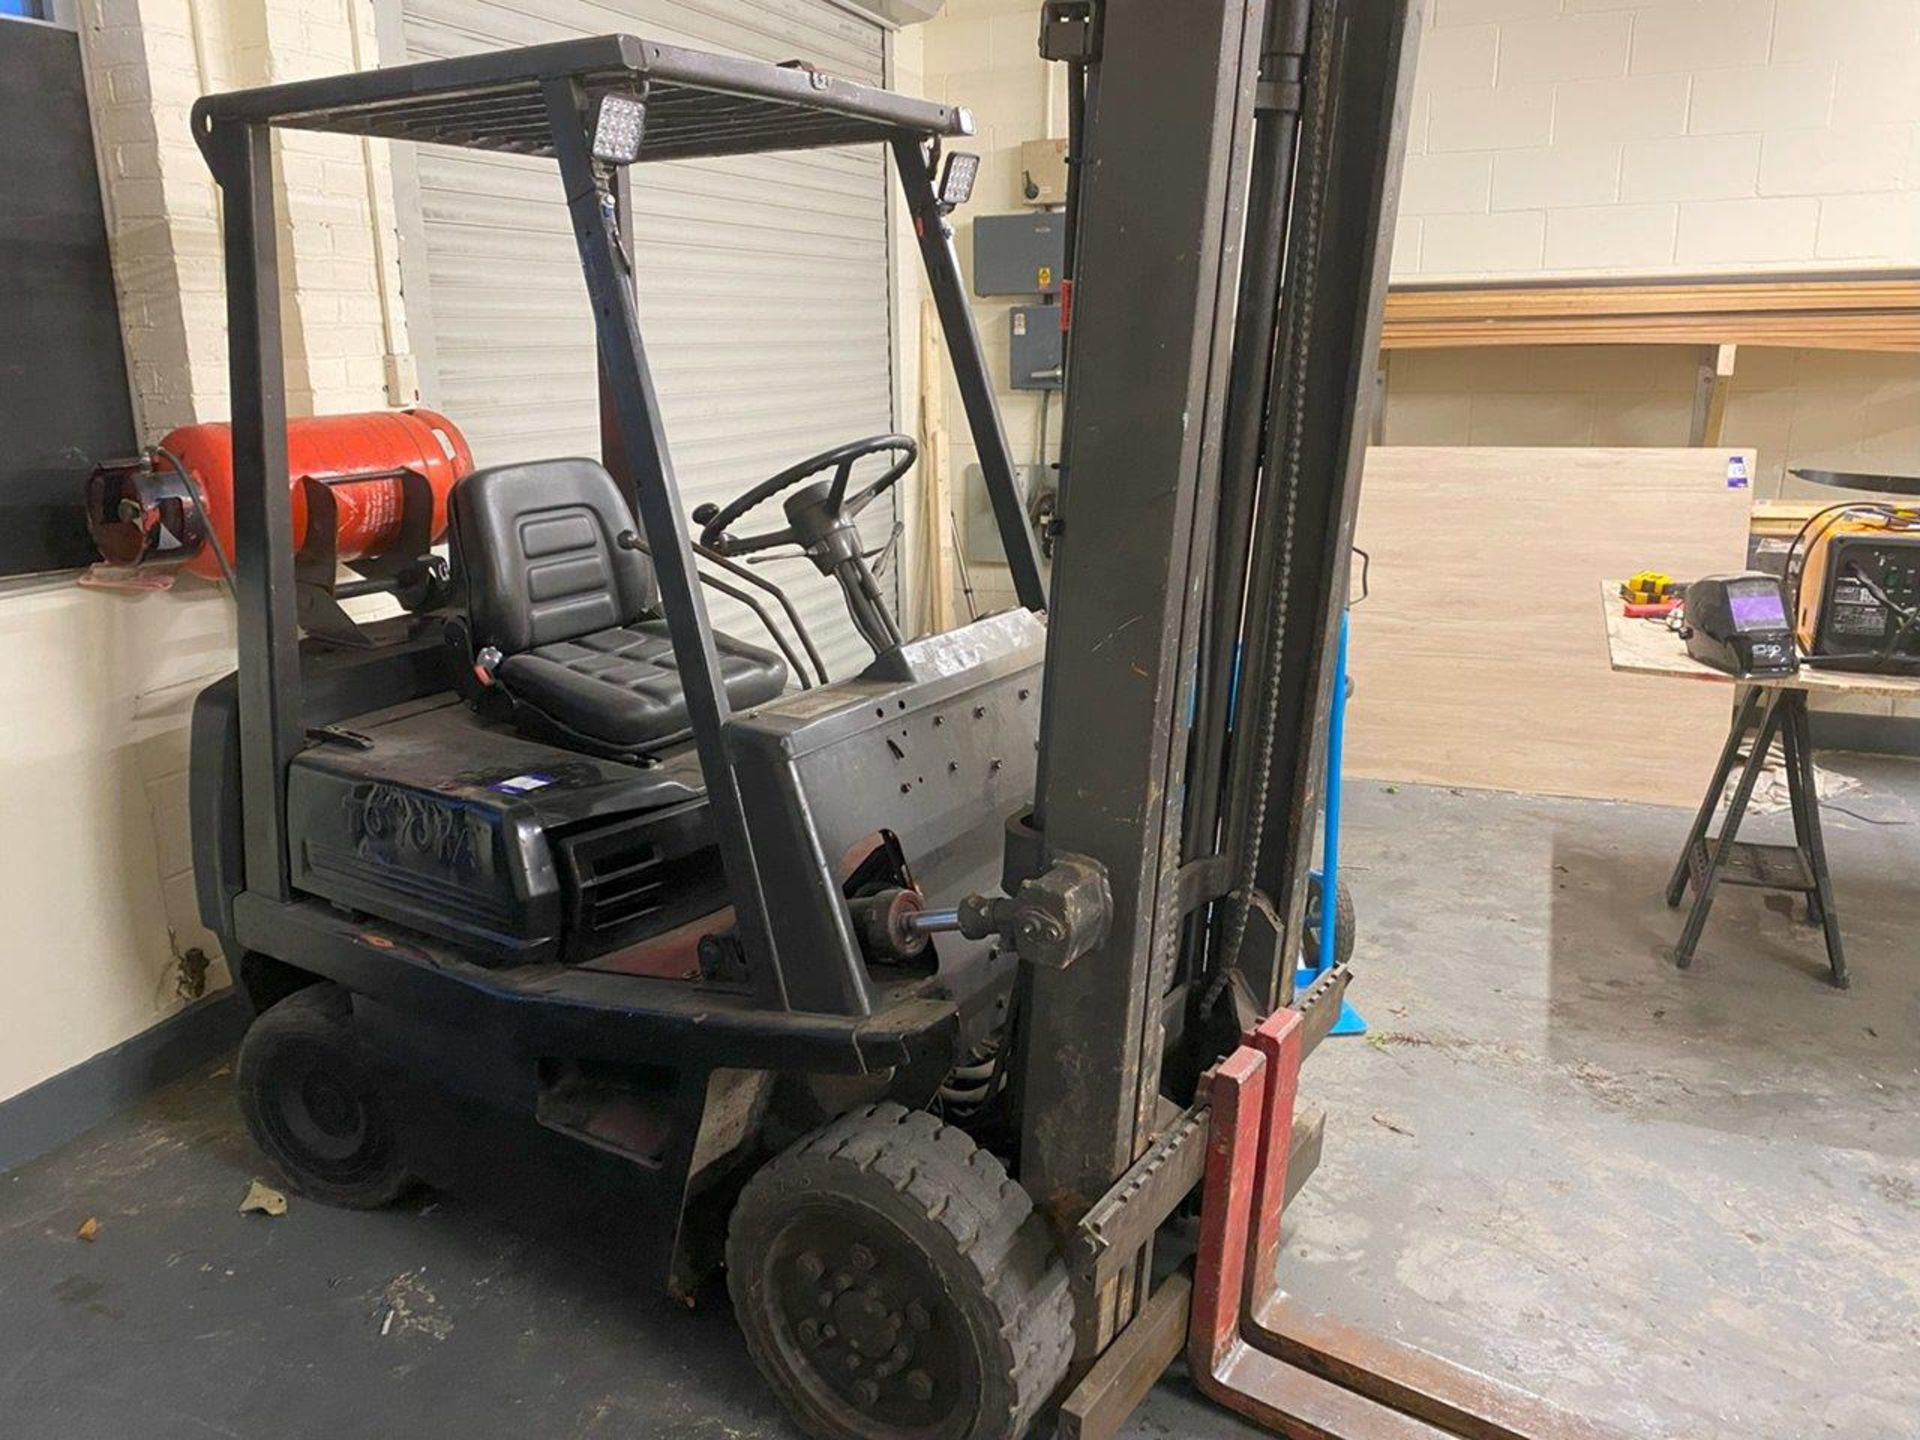 TOYOTA 404FGC 2.5 12685 LPG Forklift Truck; Hours: 6216.9; Capacity: 4000LBs at 151.5in - Image 2 of 10